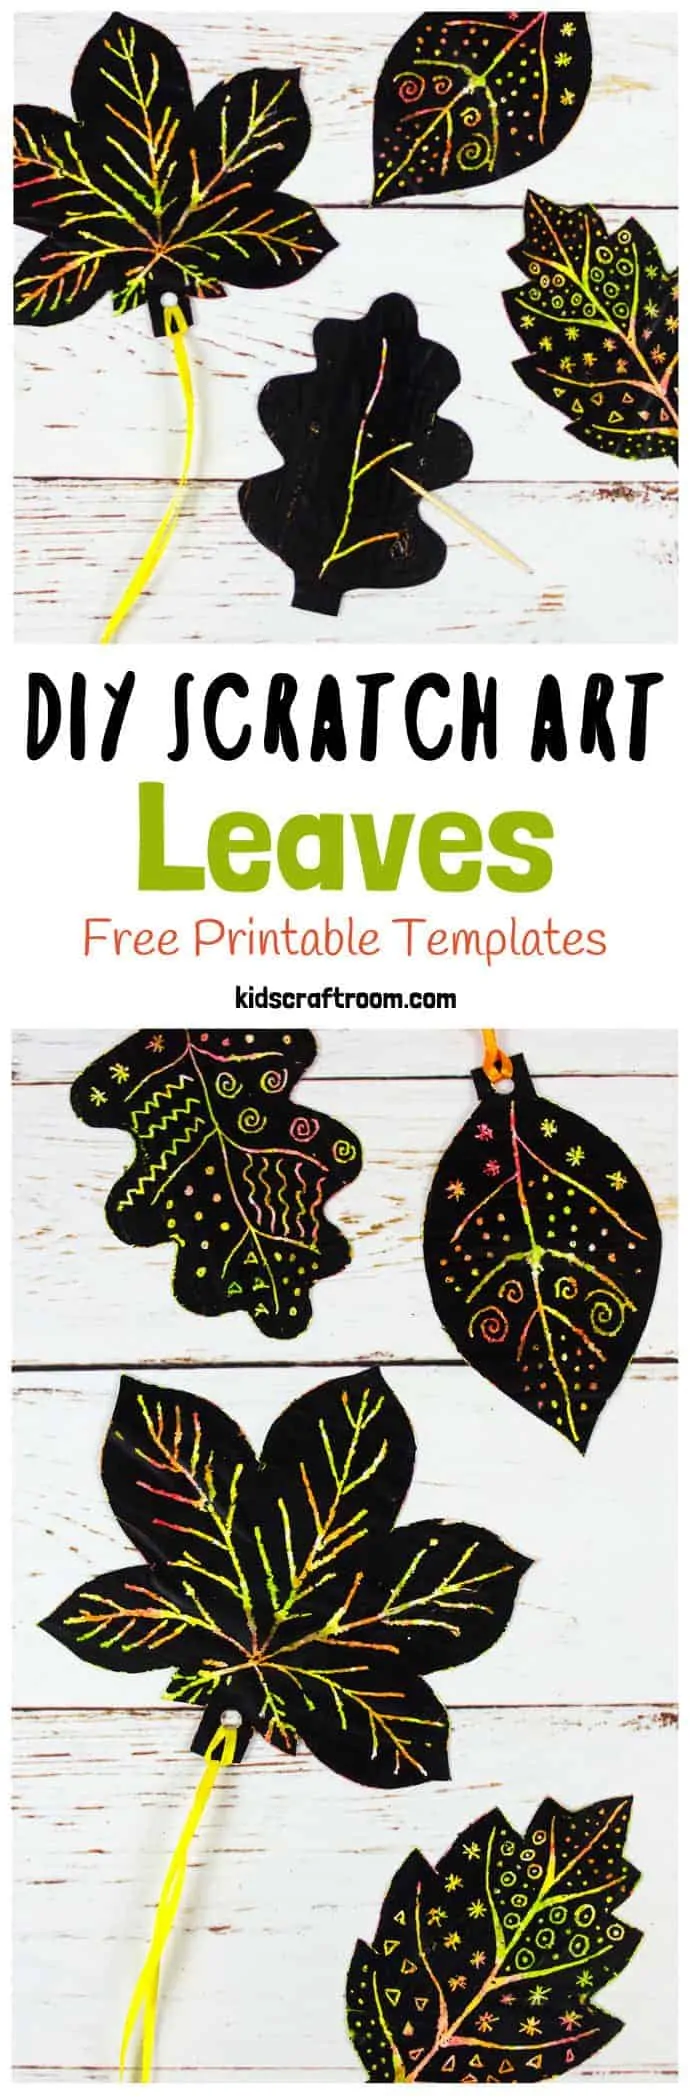 Make a Colorful Winter Hat Craft with Scratch Art - Projects with Kids